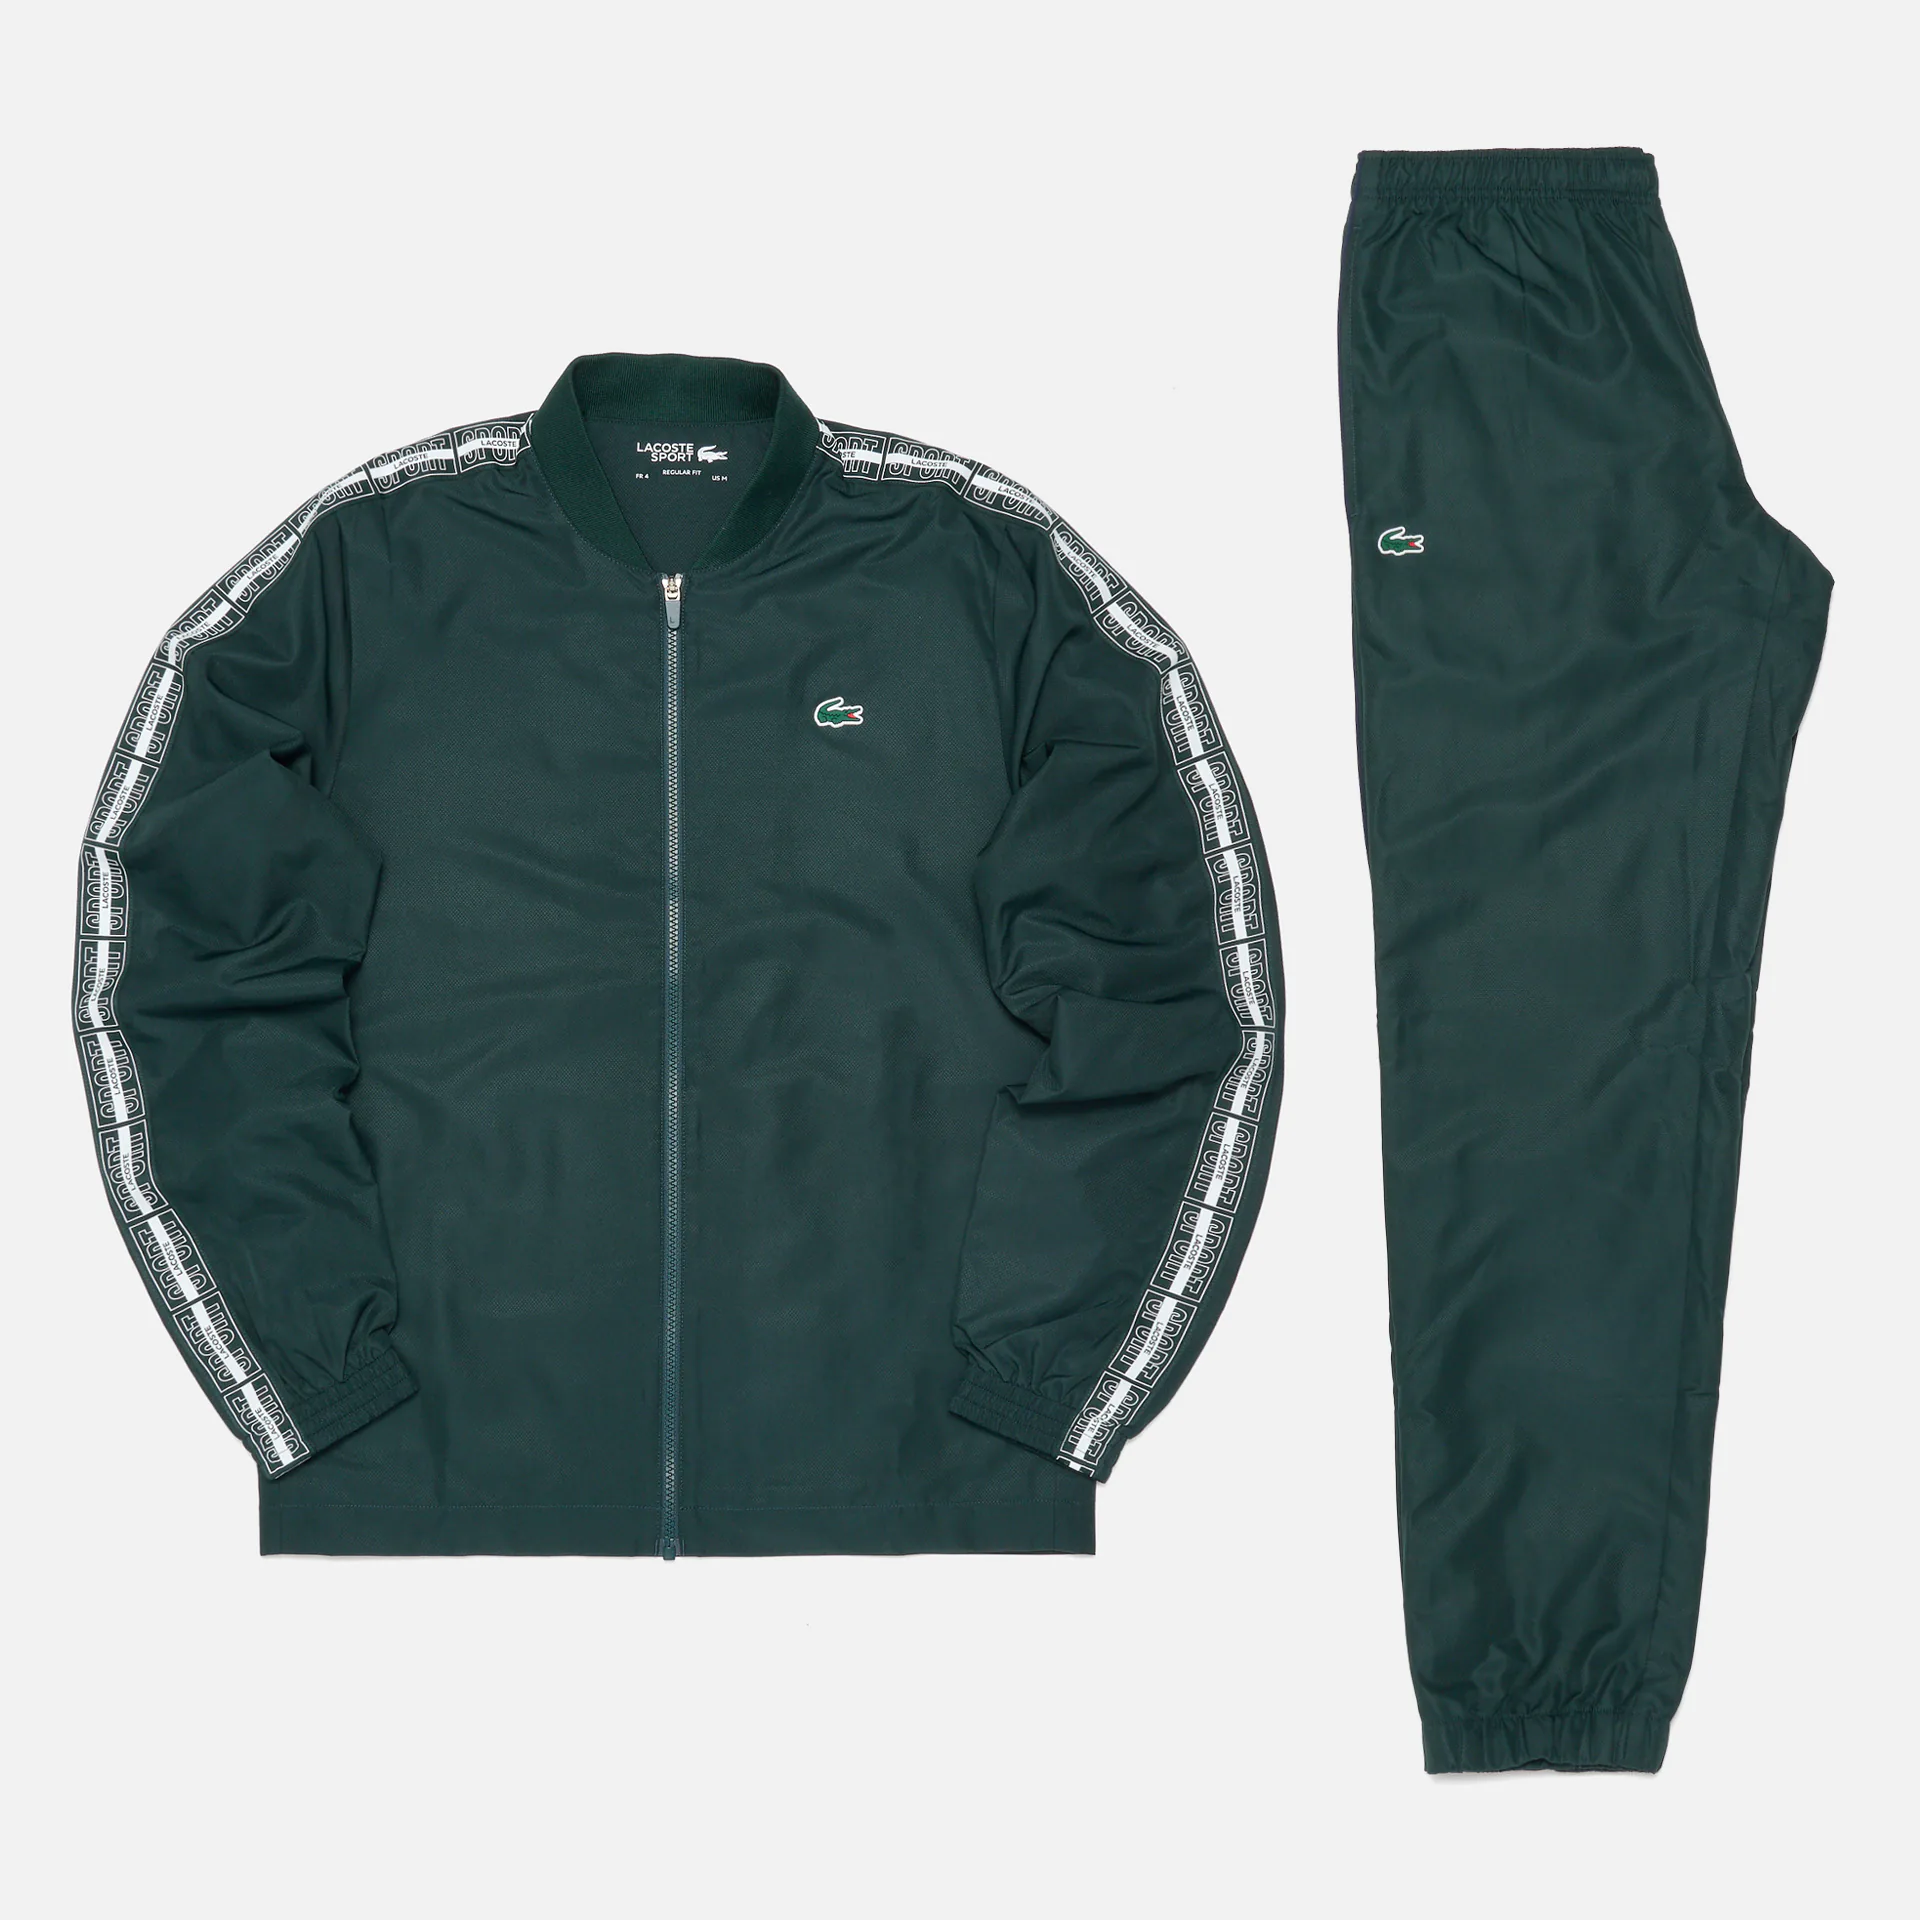 Lacoste Recycled Fabric Tennis Tracksuit Sinople